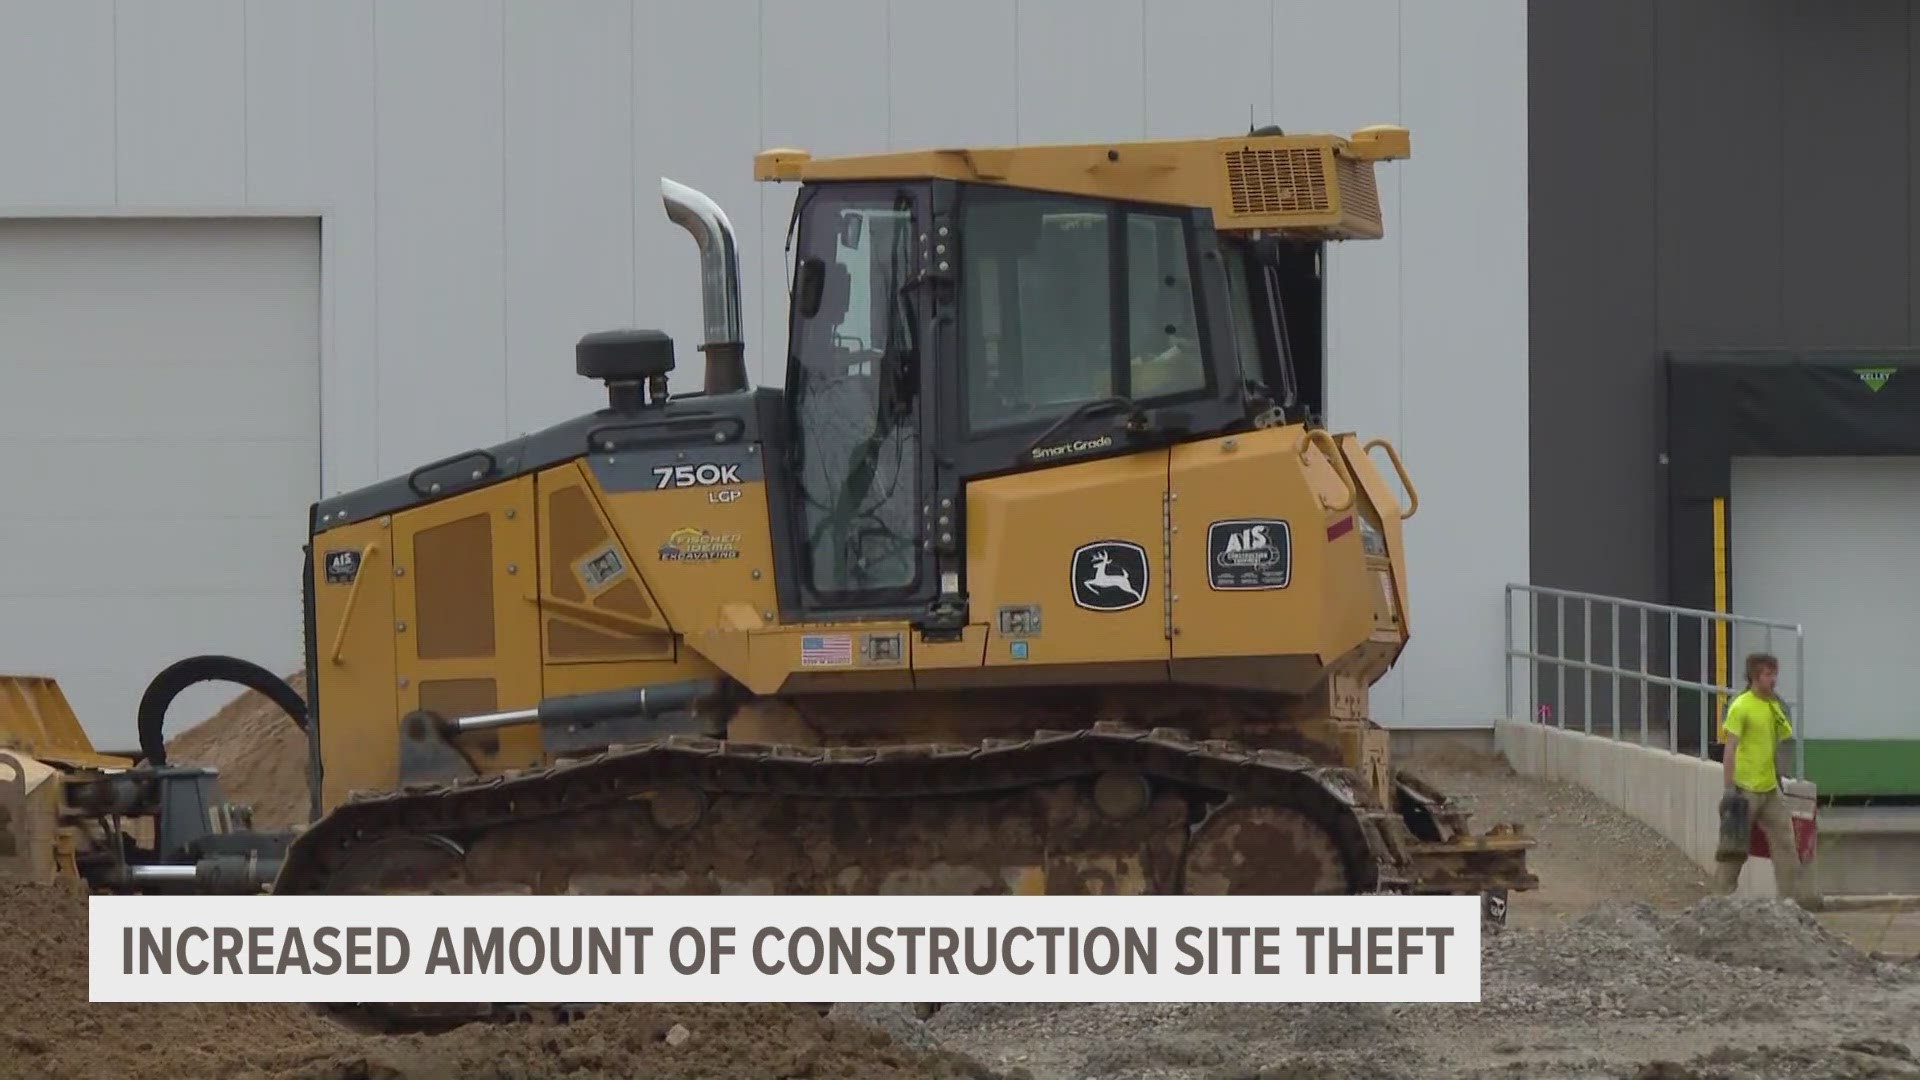 Since the start of April, deputies say trailers, tools and materials have been taken from construction sites in Kent County.